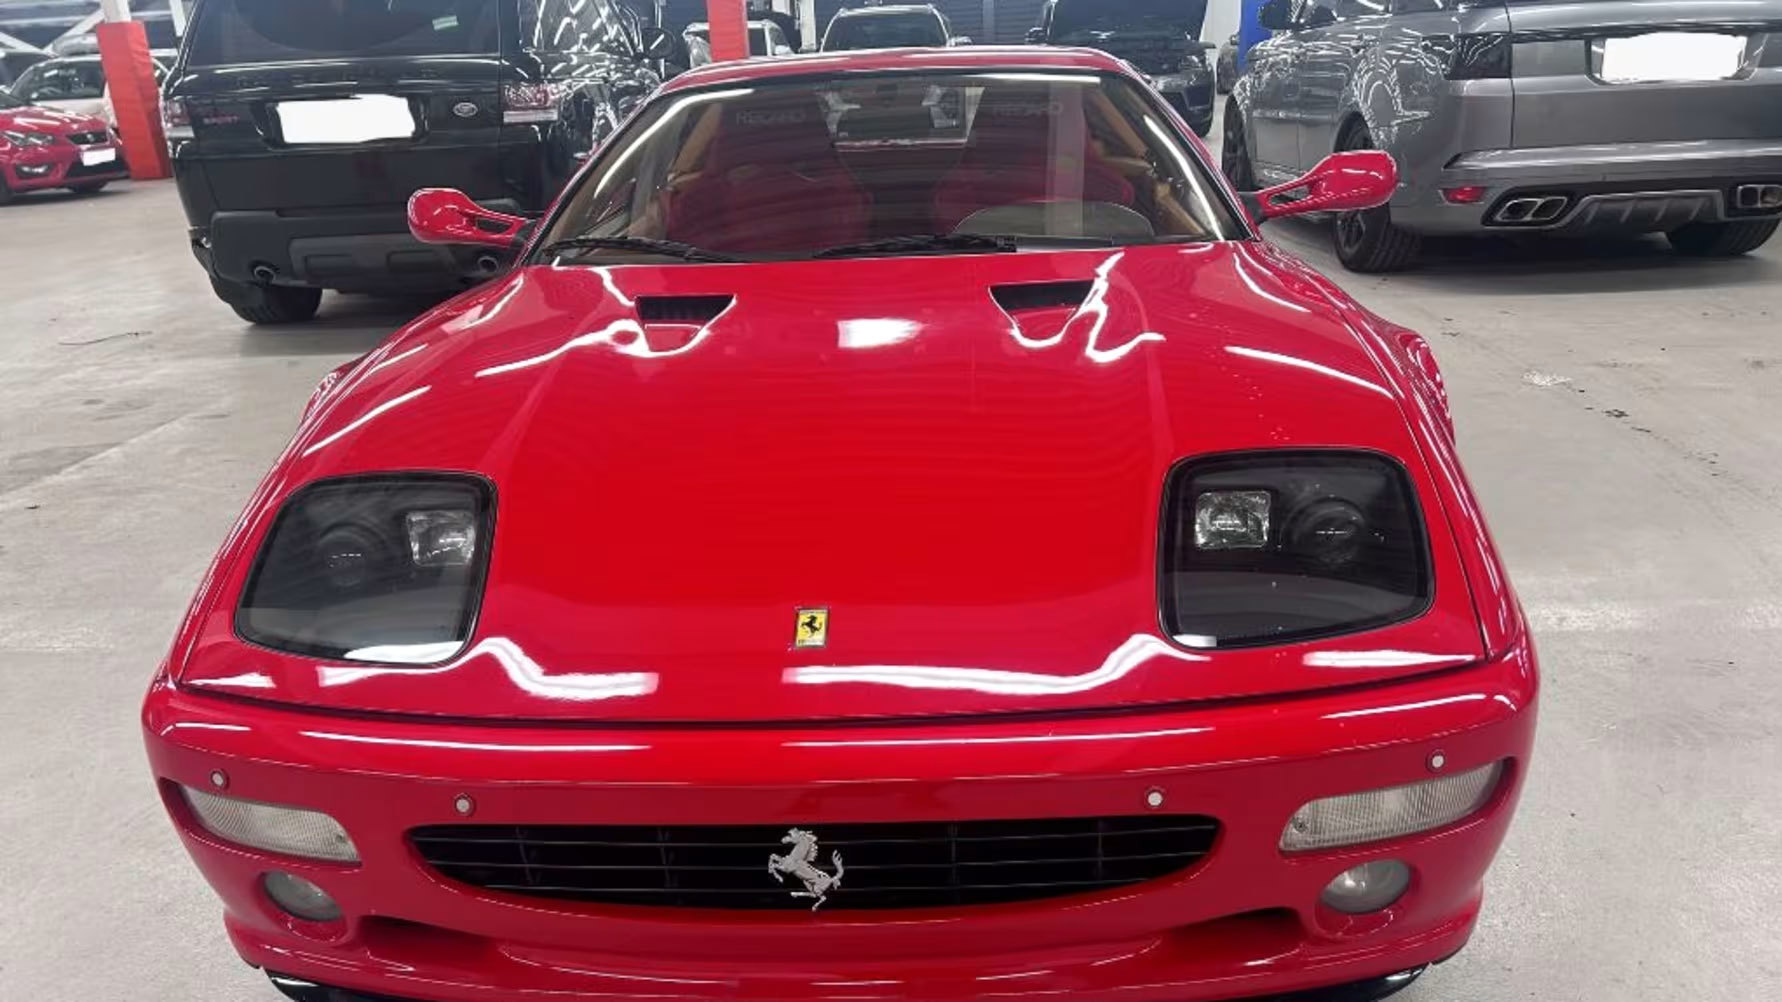 Ferrari stolen from F1 driver in 1995 recovered by police